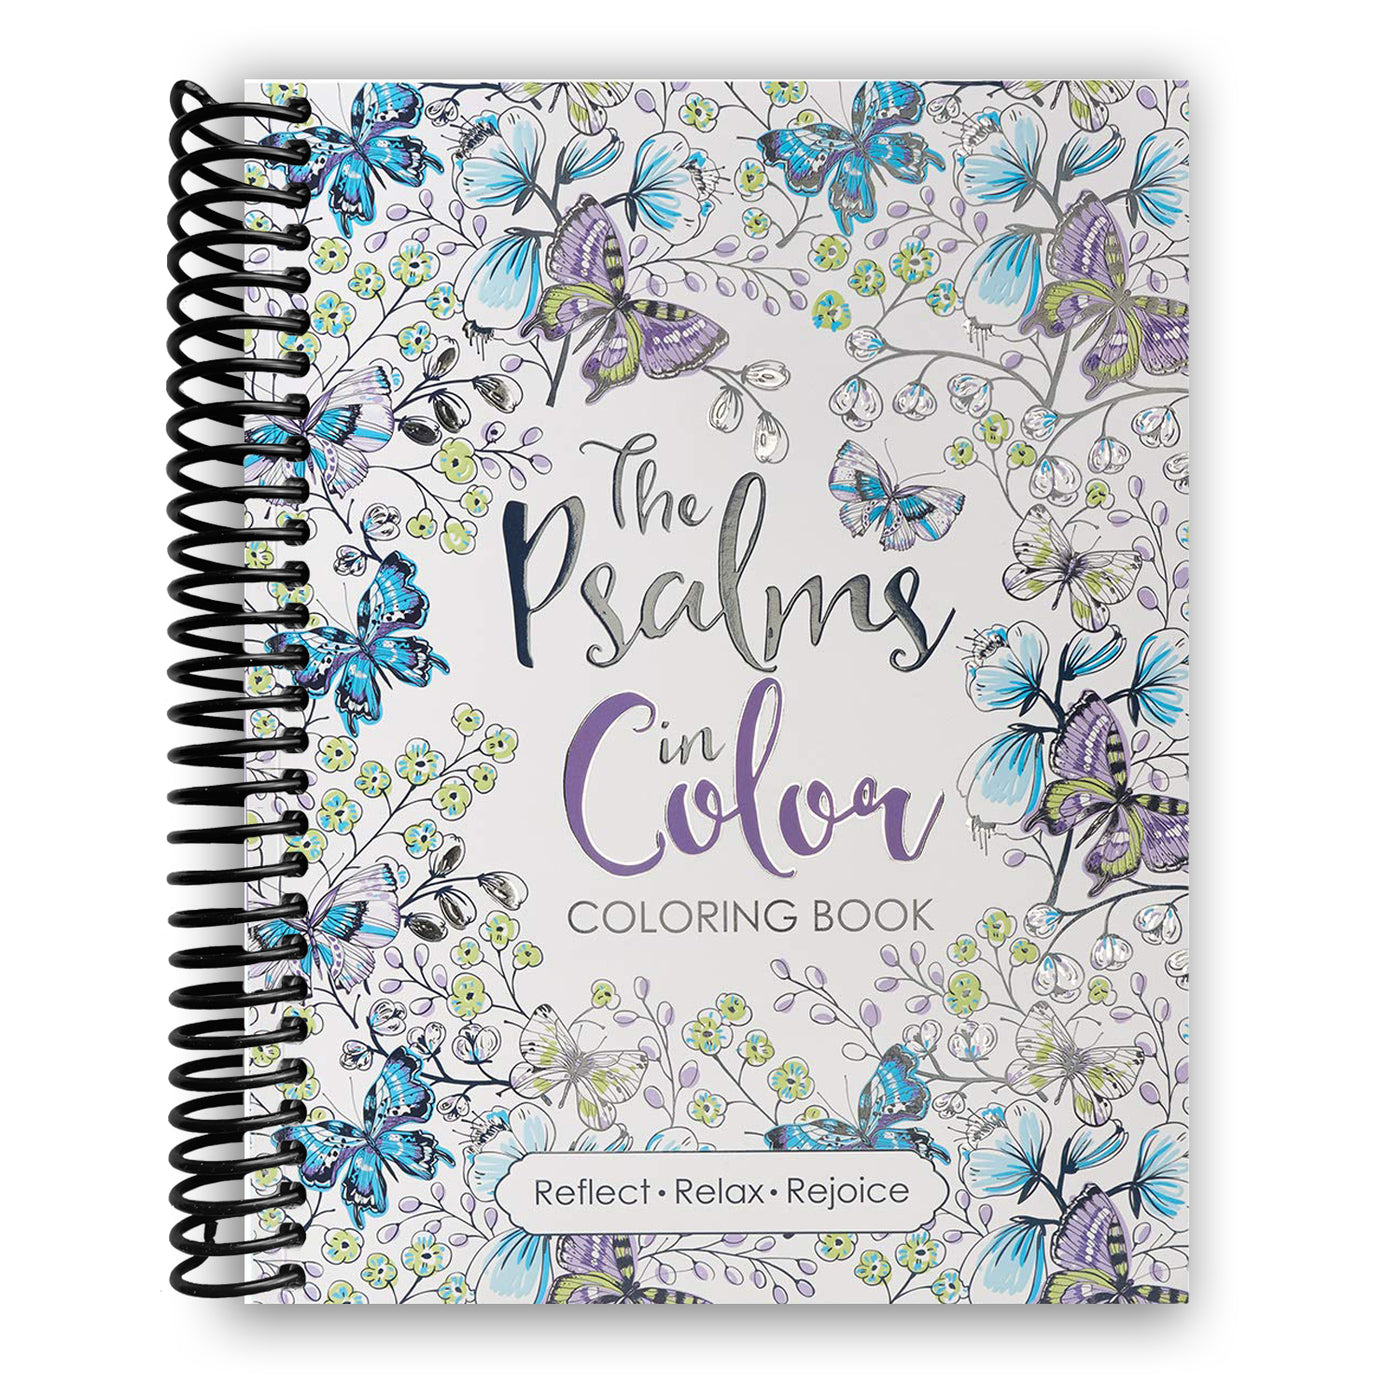 The Psalms in Color Inspirational Coloring Book with Scripture for Women and Teens (Spiral Bound)